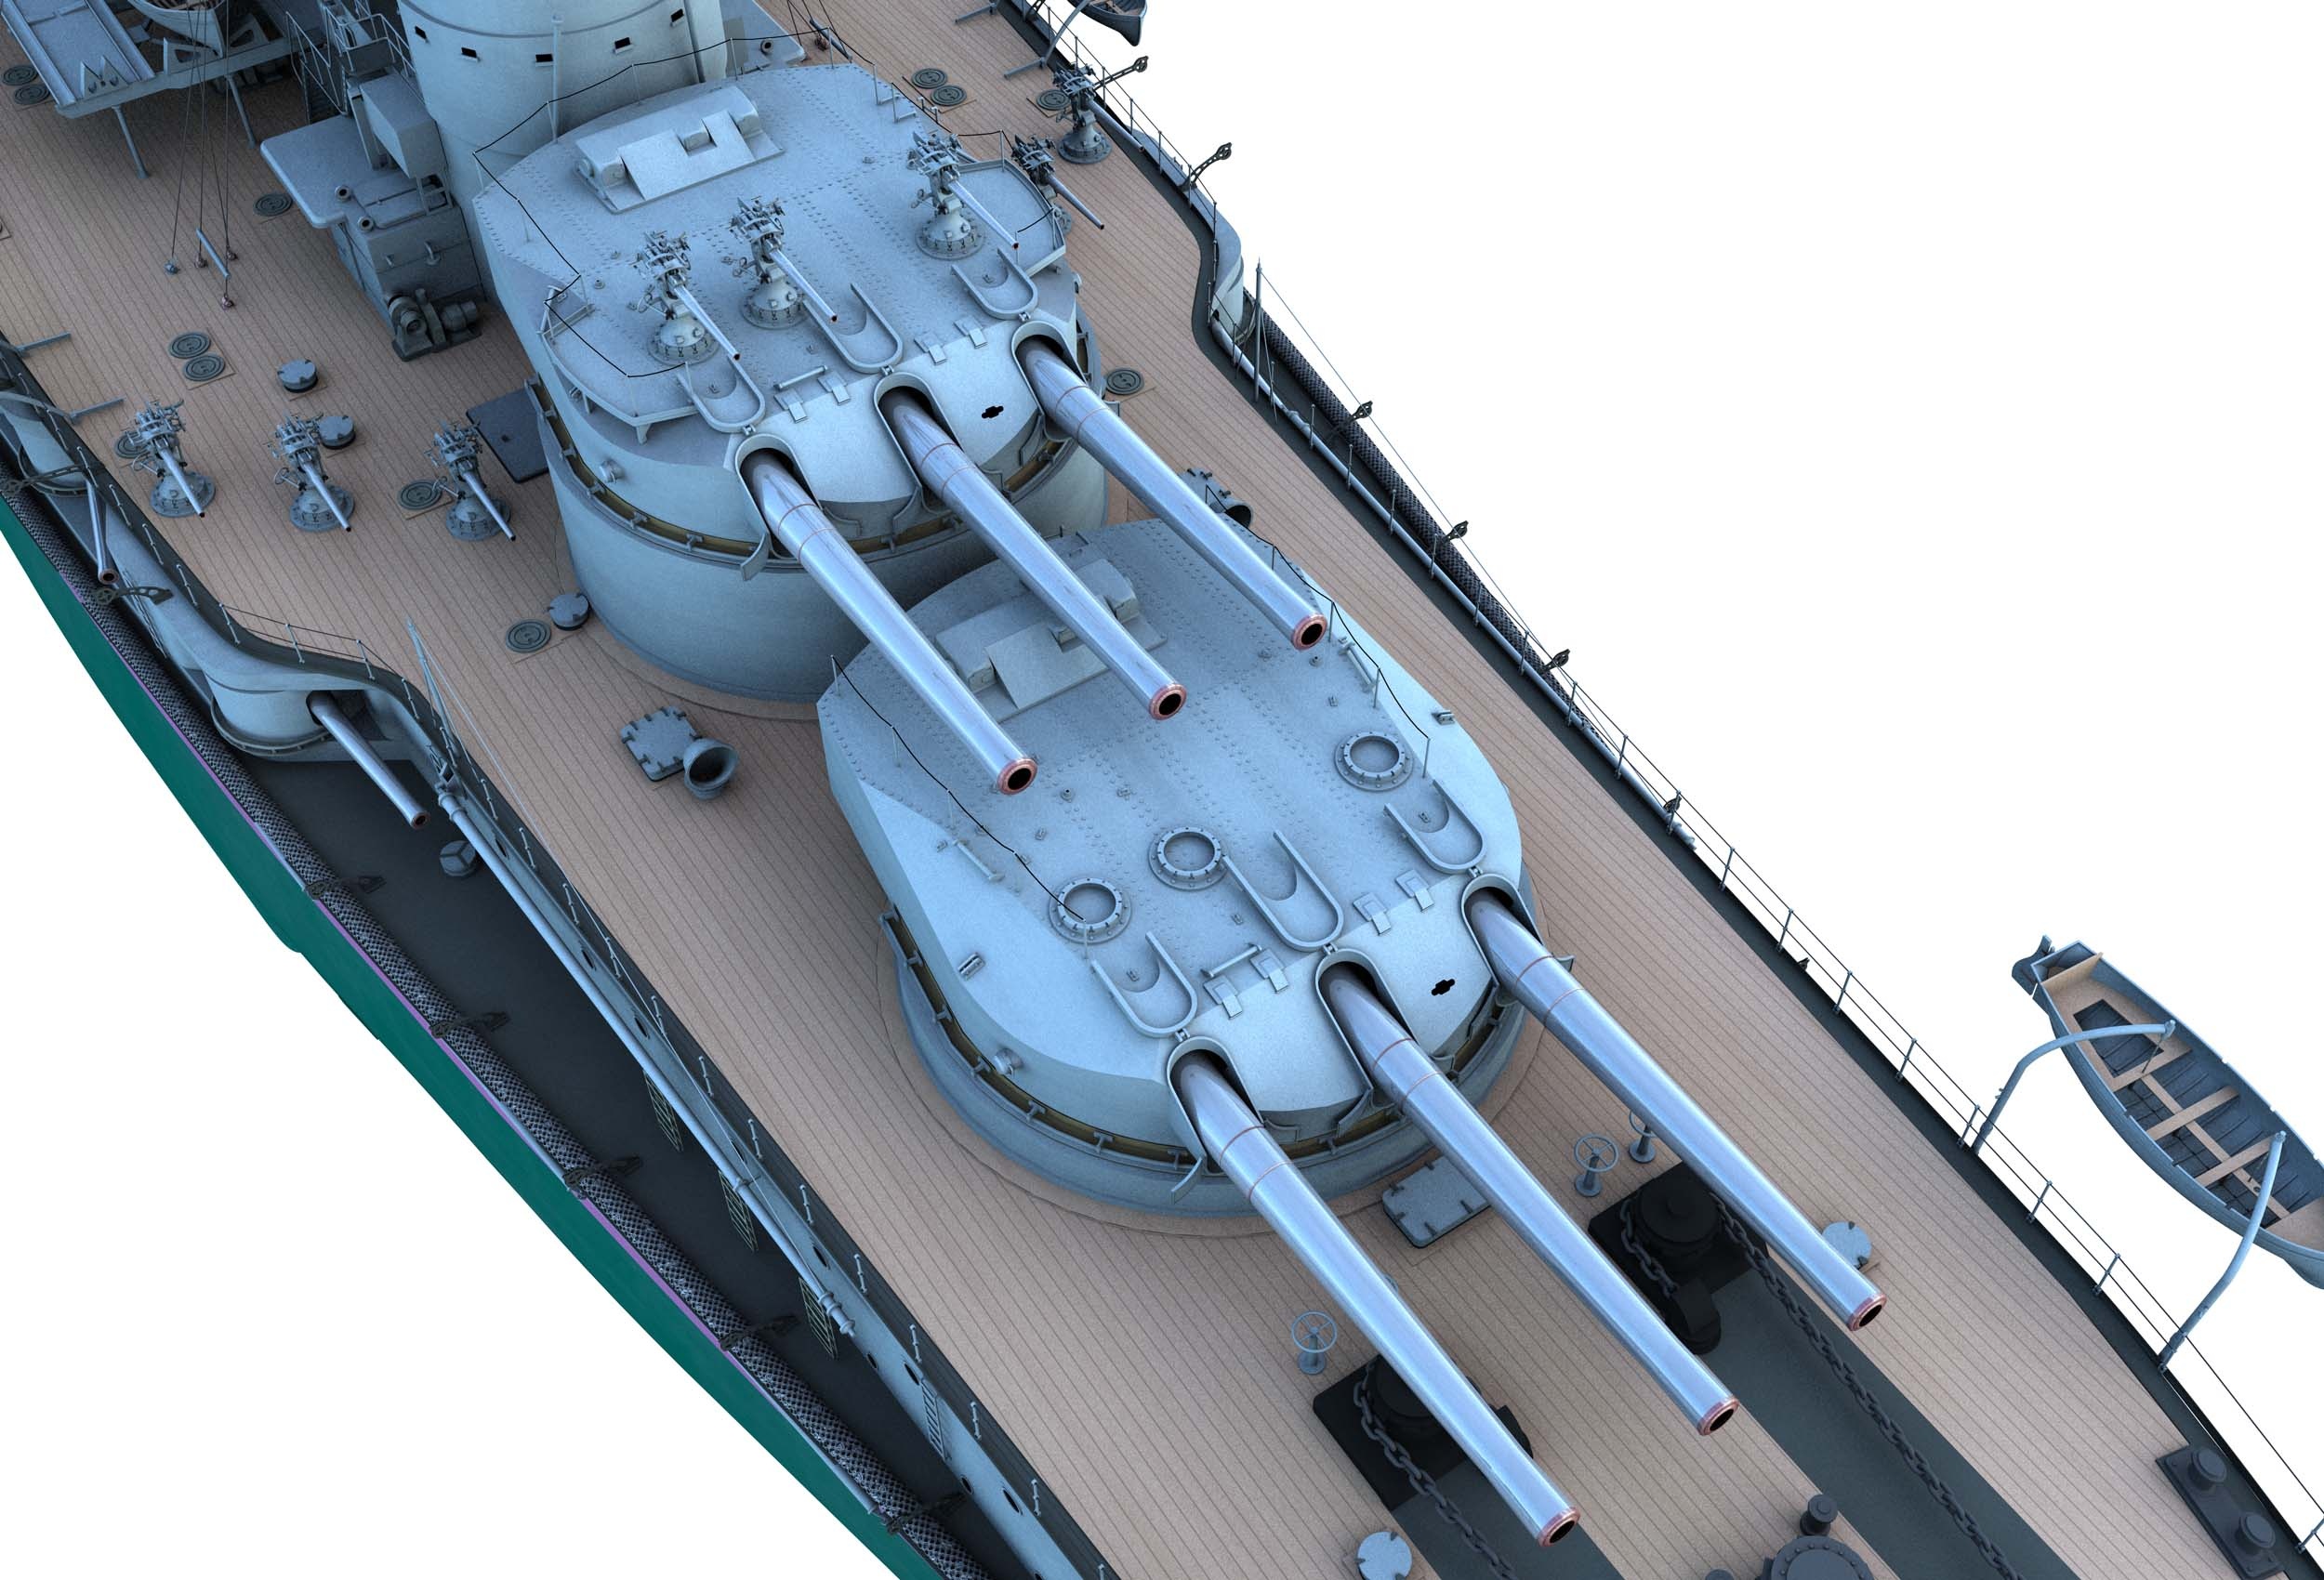 https://0901.nccdn.net/4_2/000/000/050/773/CK6-Partial-Ship-Bow-Starboard-Turrets-I-and-II-2500x1700.jpg